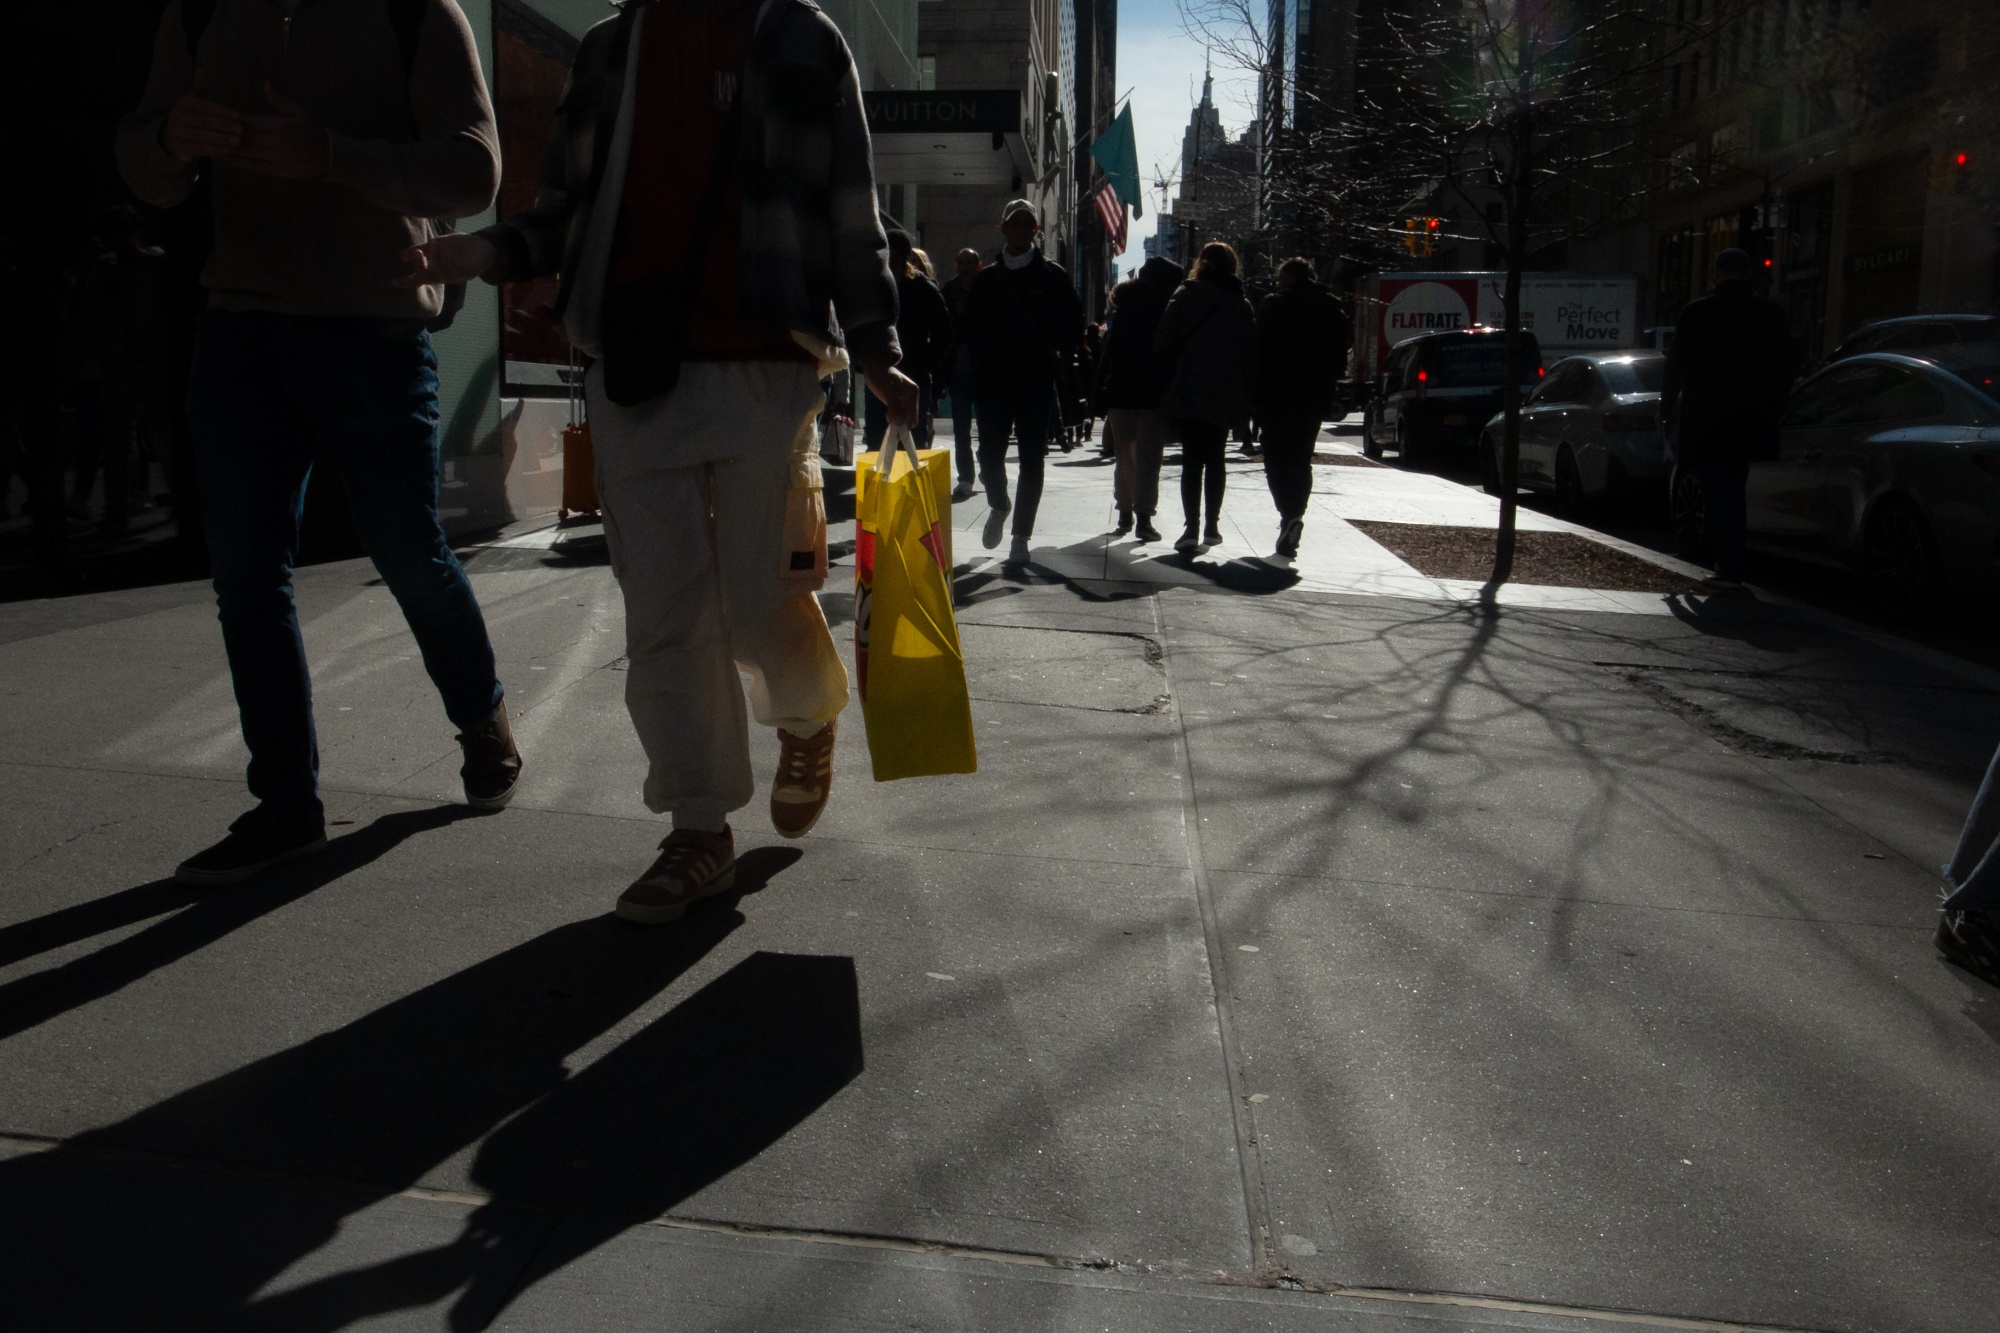 Shoppers on 5th Avenue in New York.